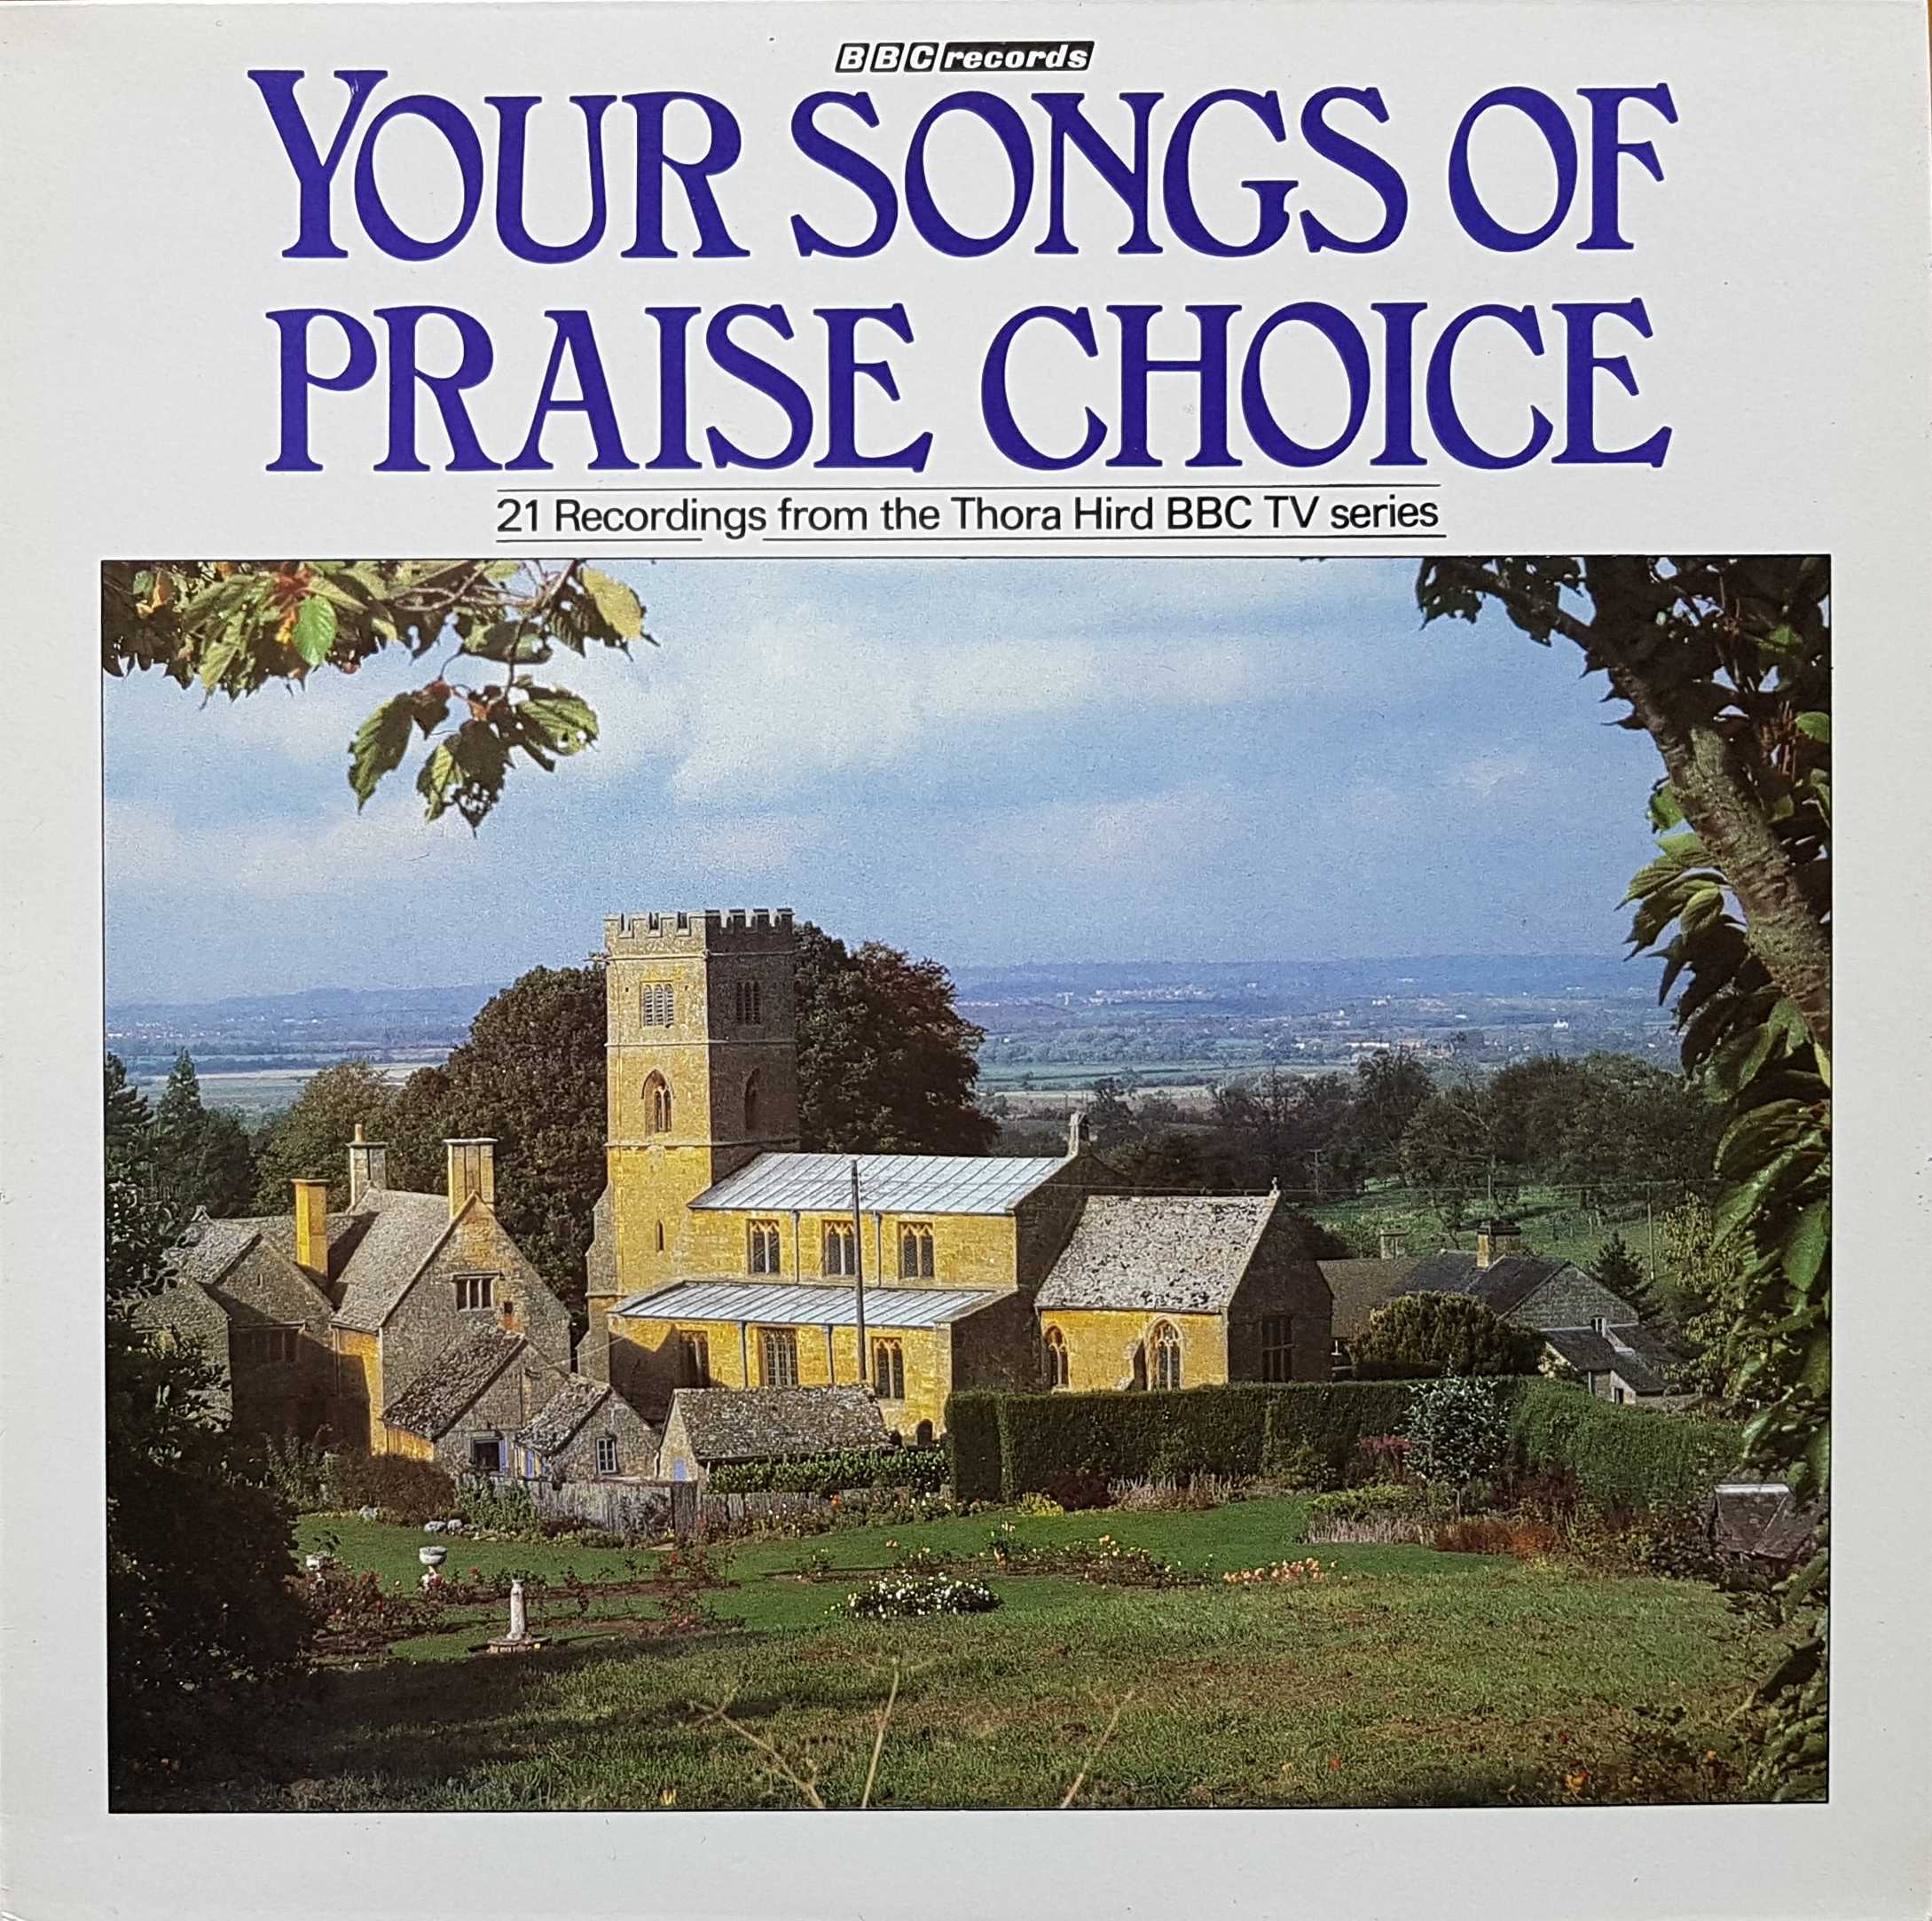 Picture of REC 469 Your songs of praise choice by artist Thora Hird  from the BBC albums - Records and Tapes library